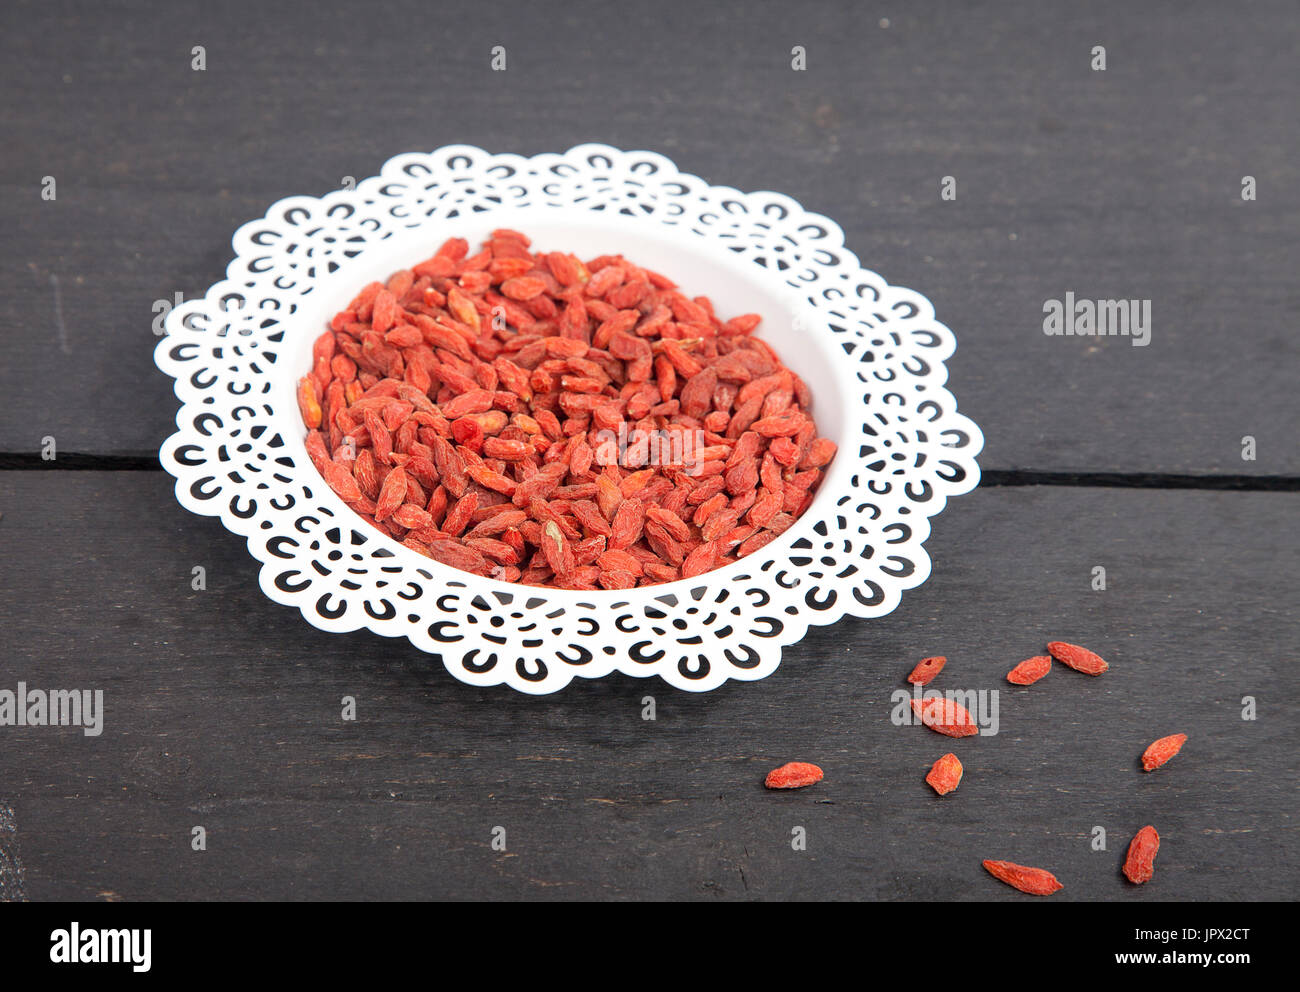 Dried goji berries in white bowl on wooden background Stock Photo